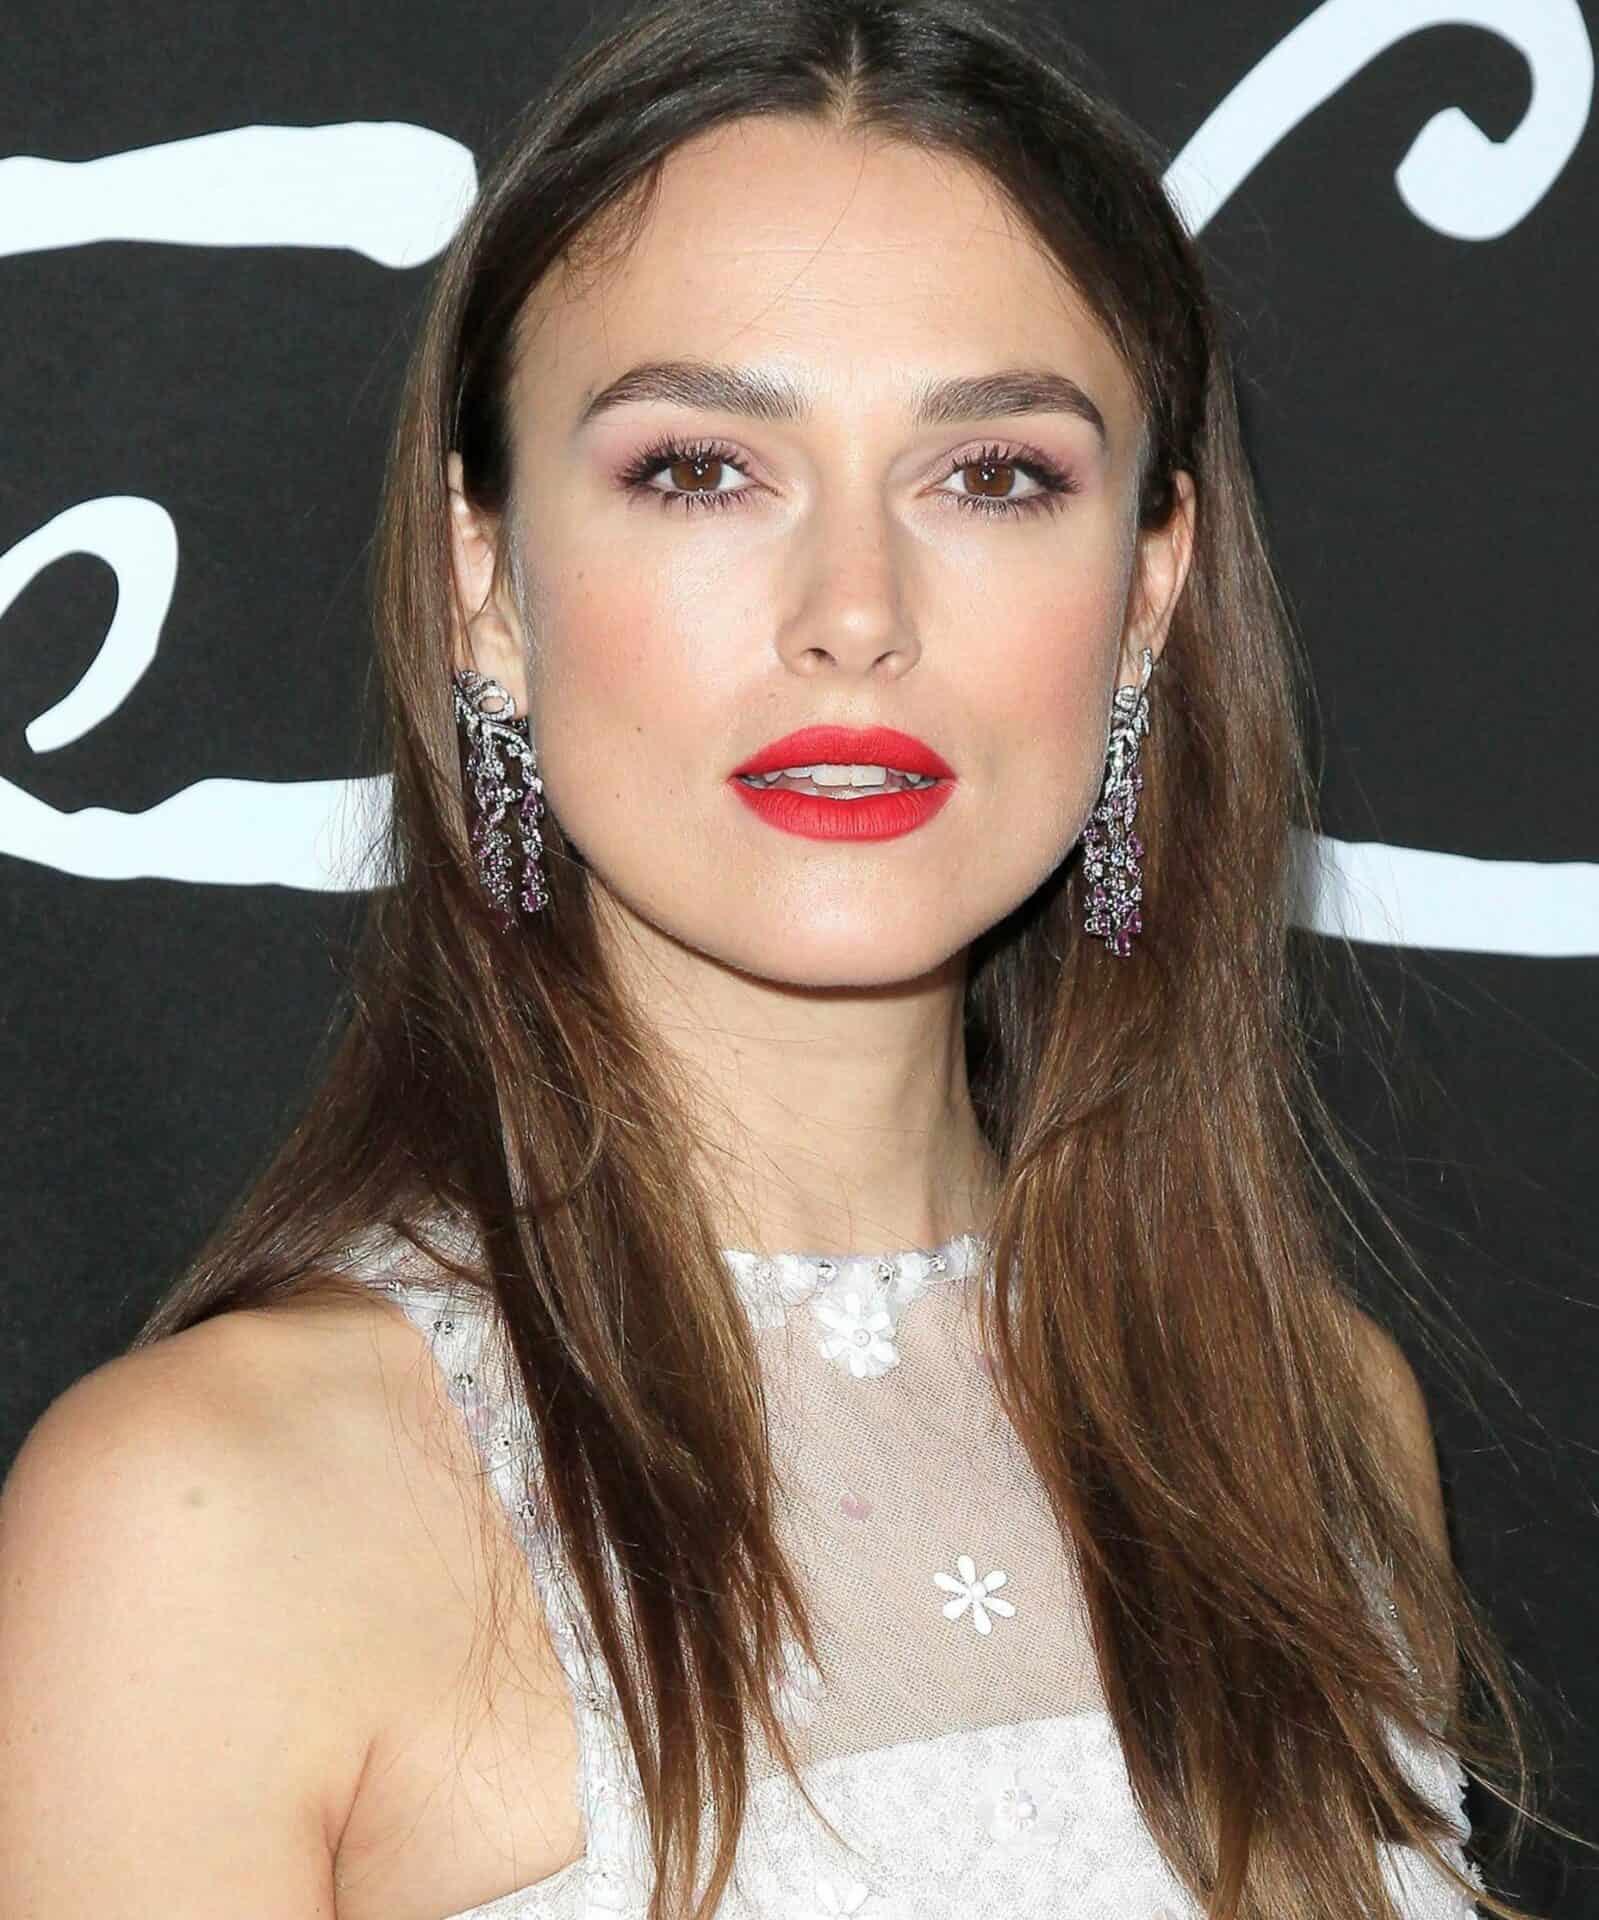 Keira Knightley faced criticism during the COVID-19 lockdown